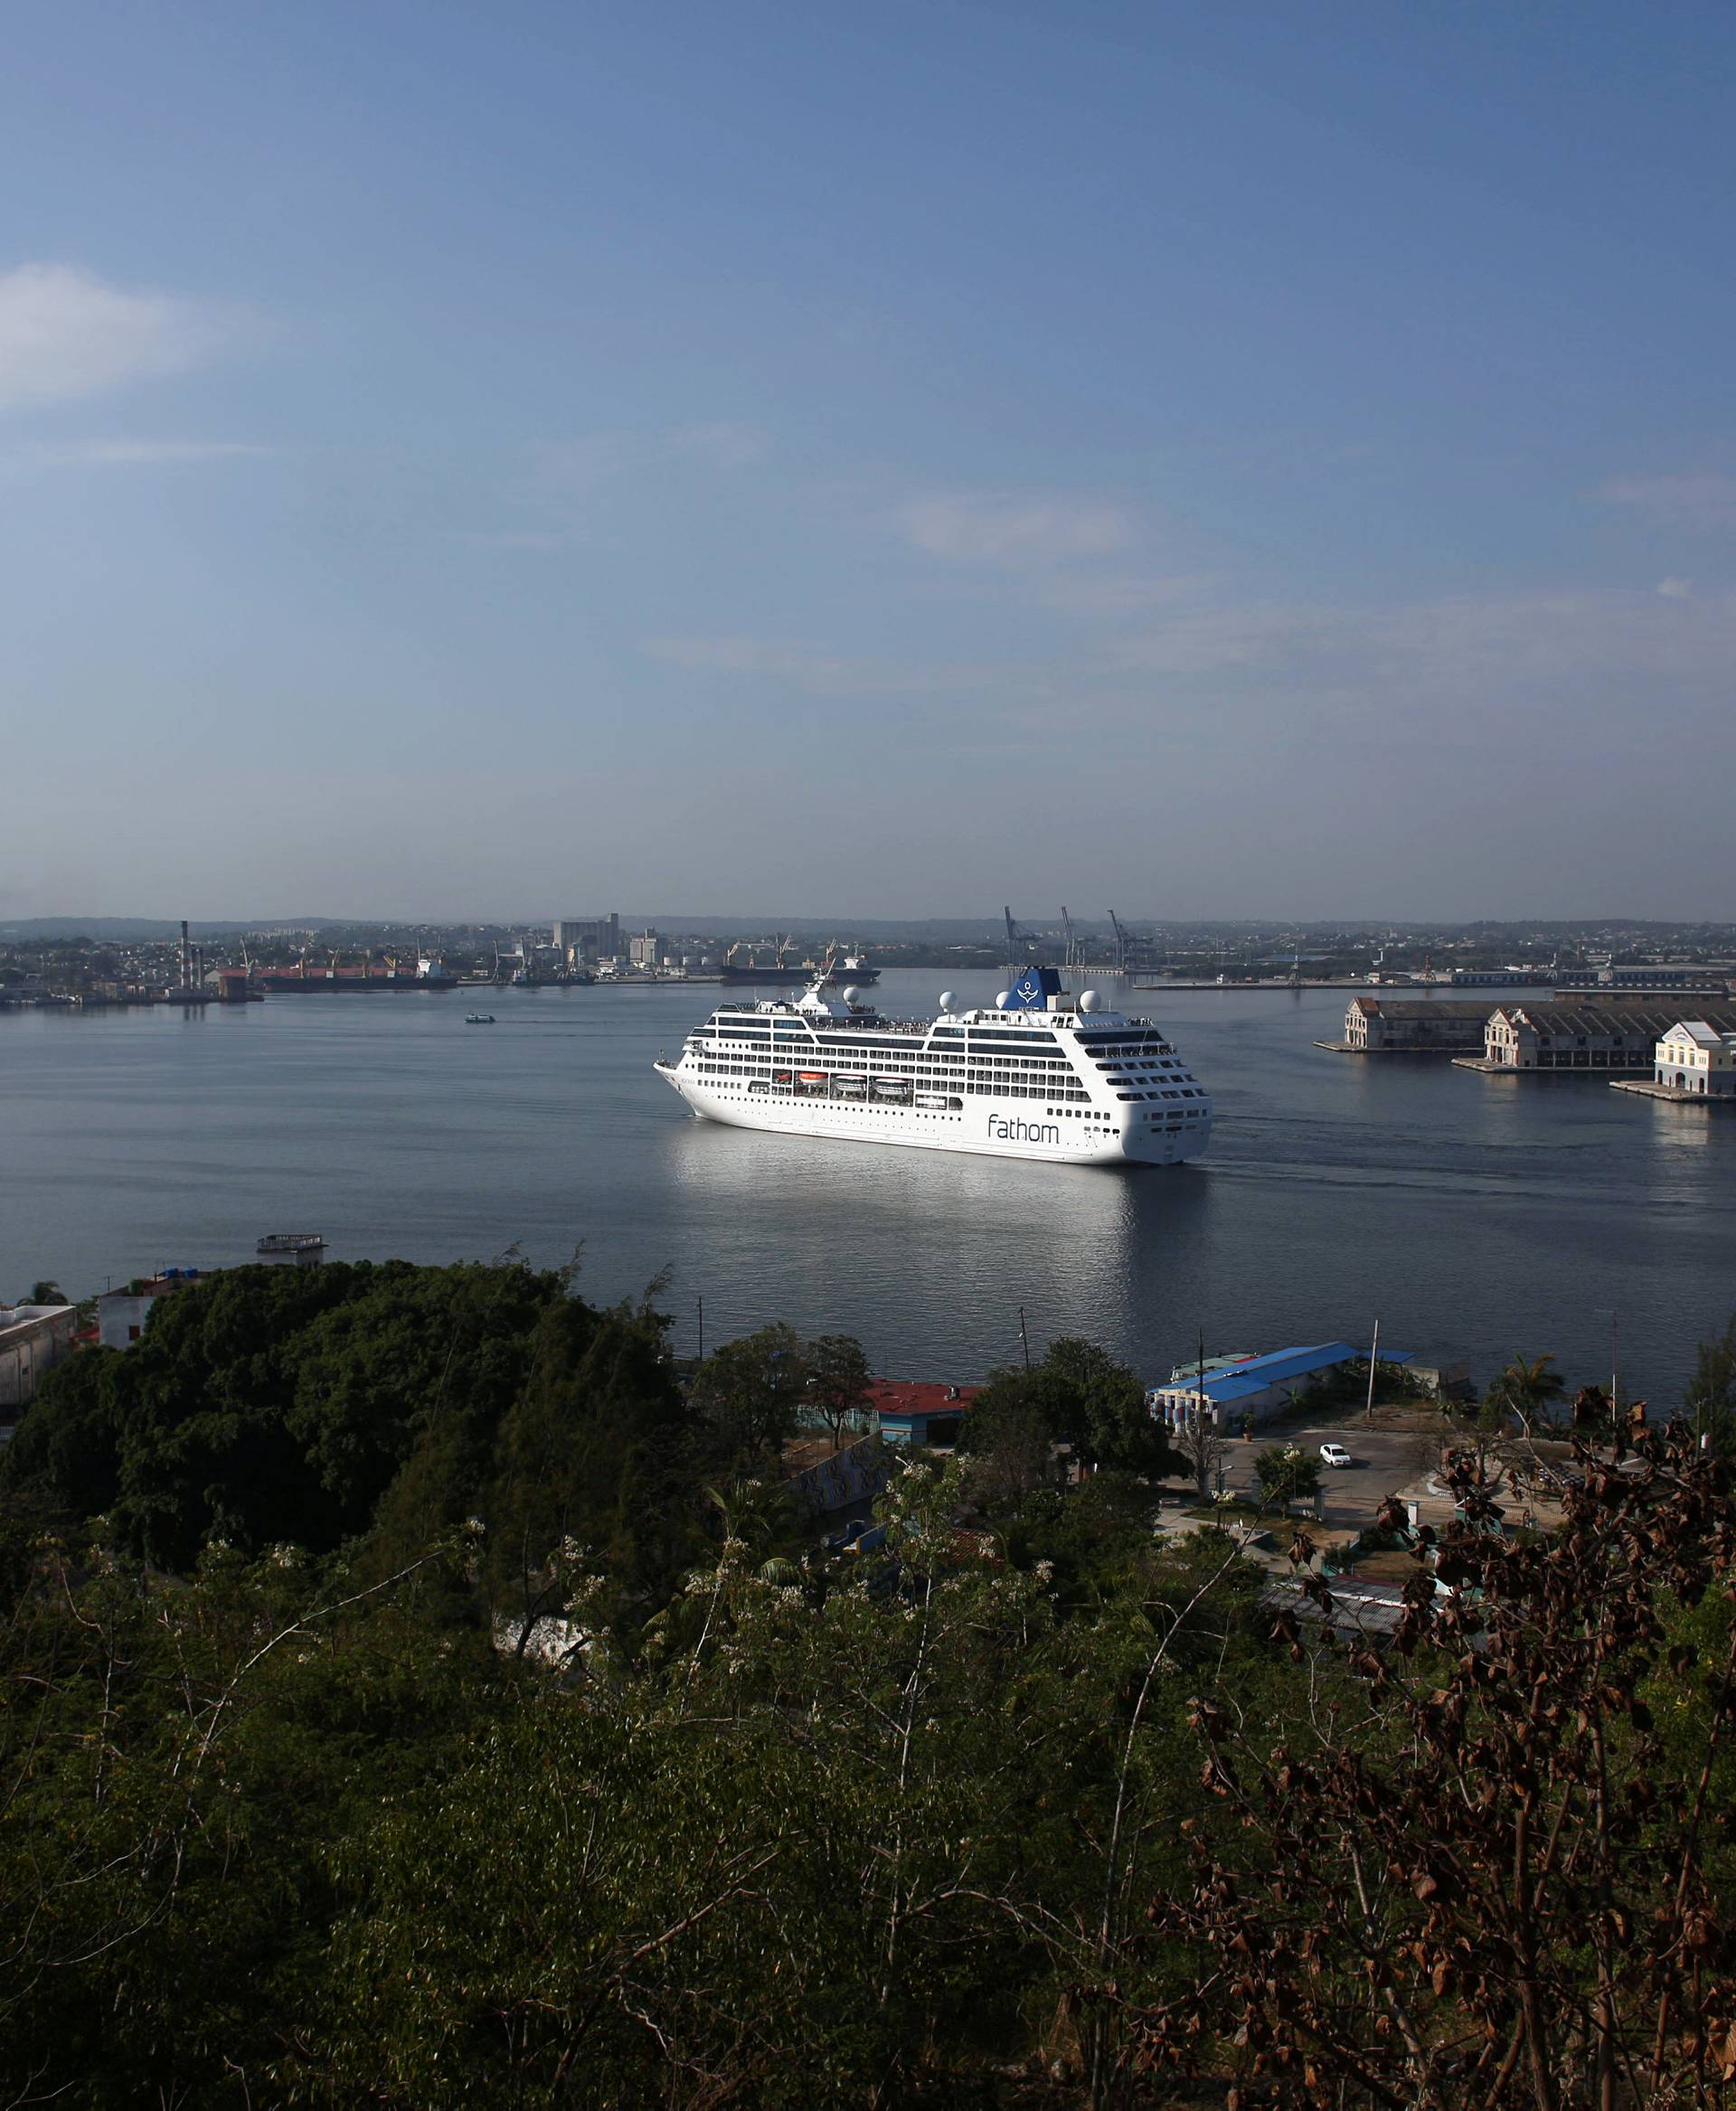 U.S. Carnival cruise ship Adonia arrives at the Havana bay, the first cruise liner to sail between the United States and Cuba since Cuba's 1959 revolution